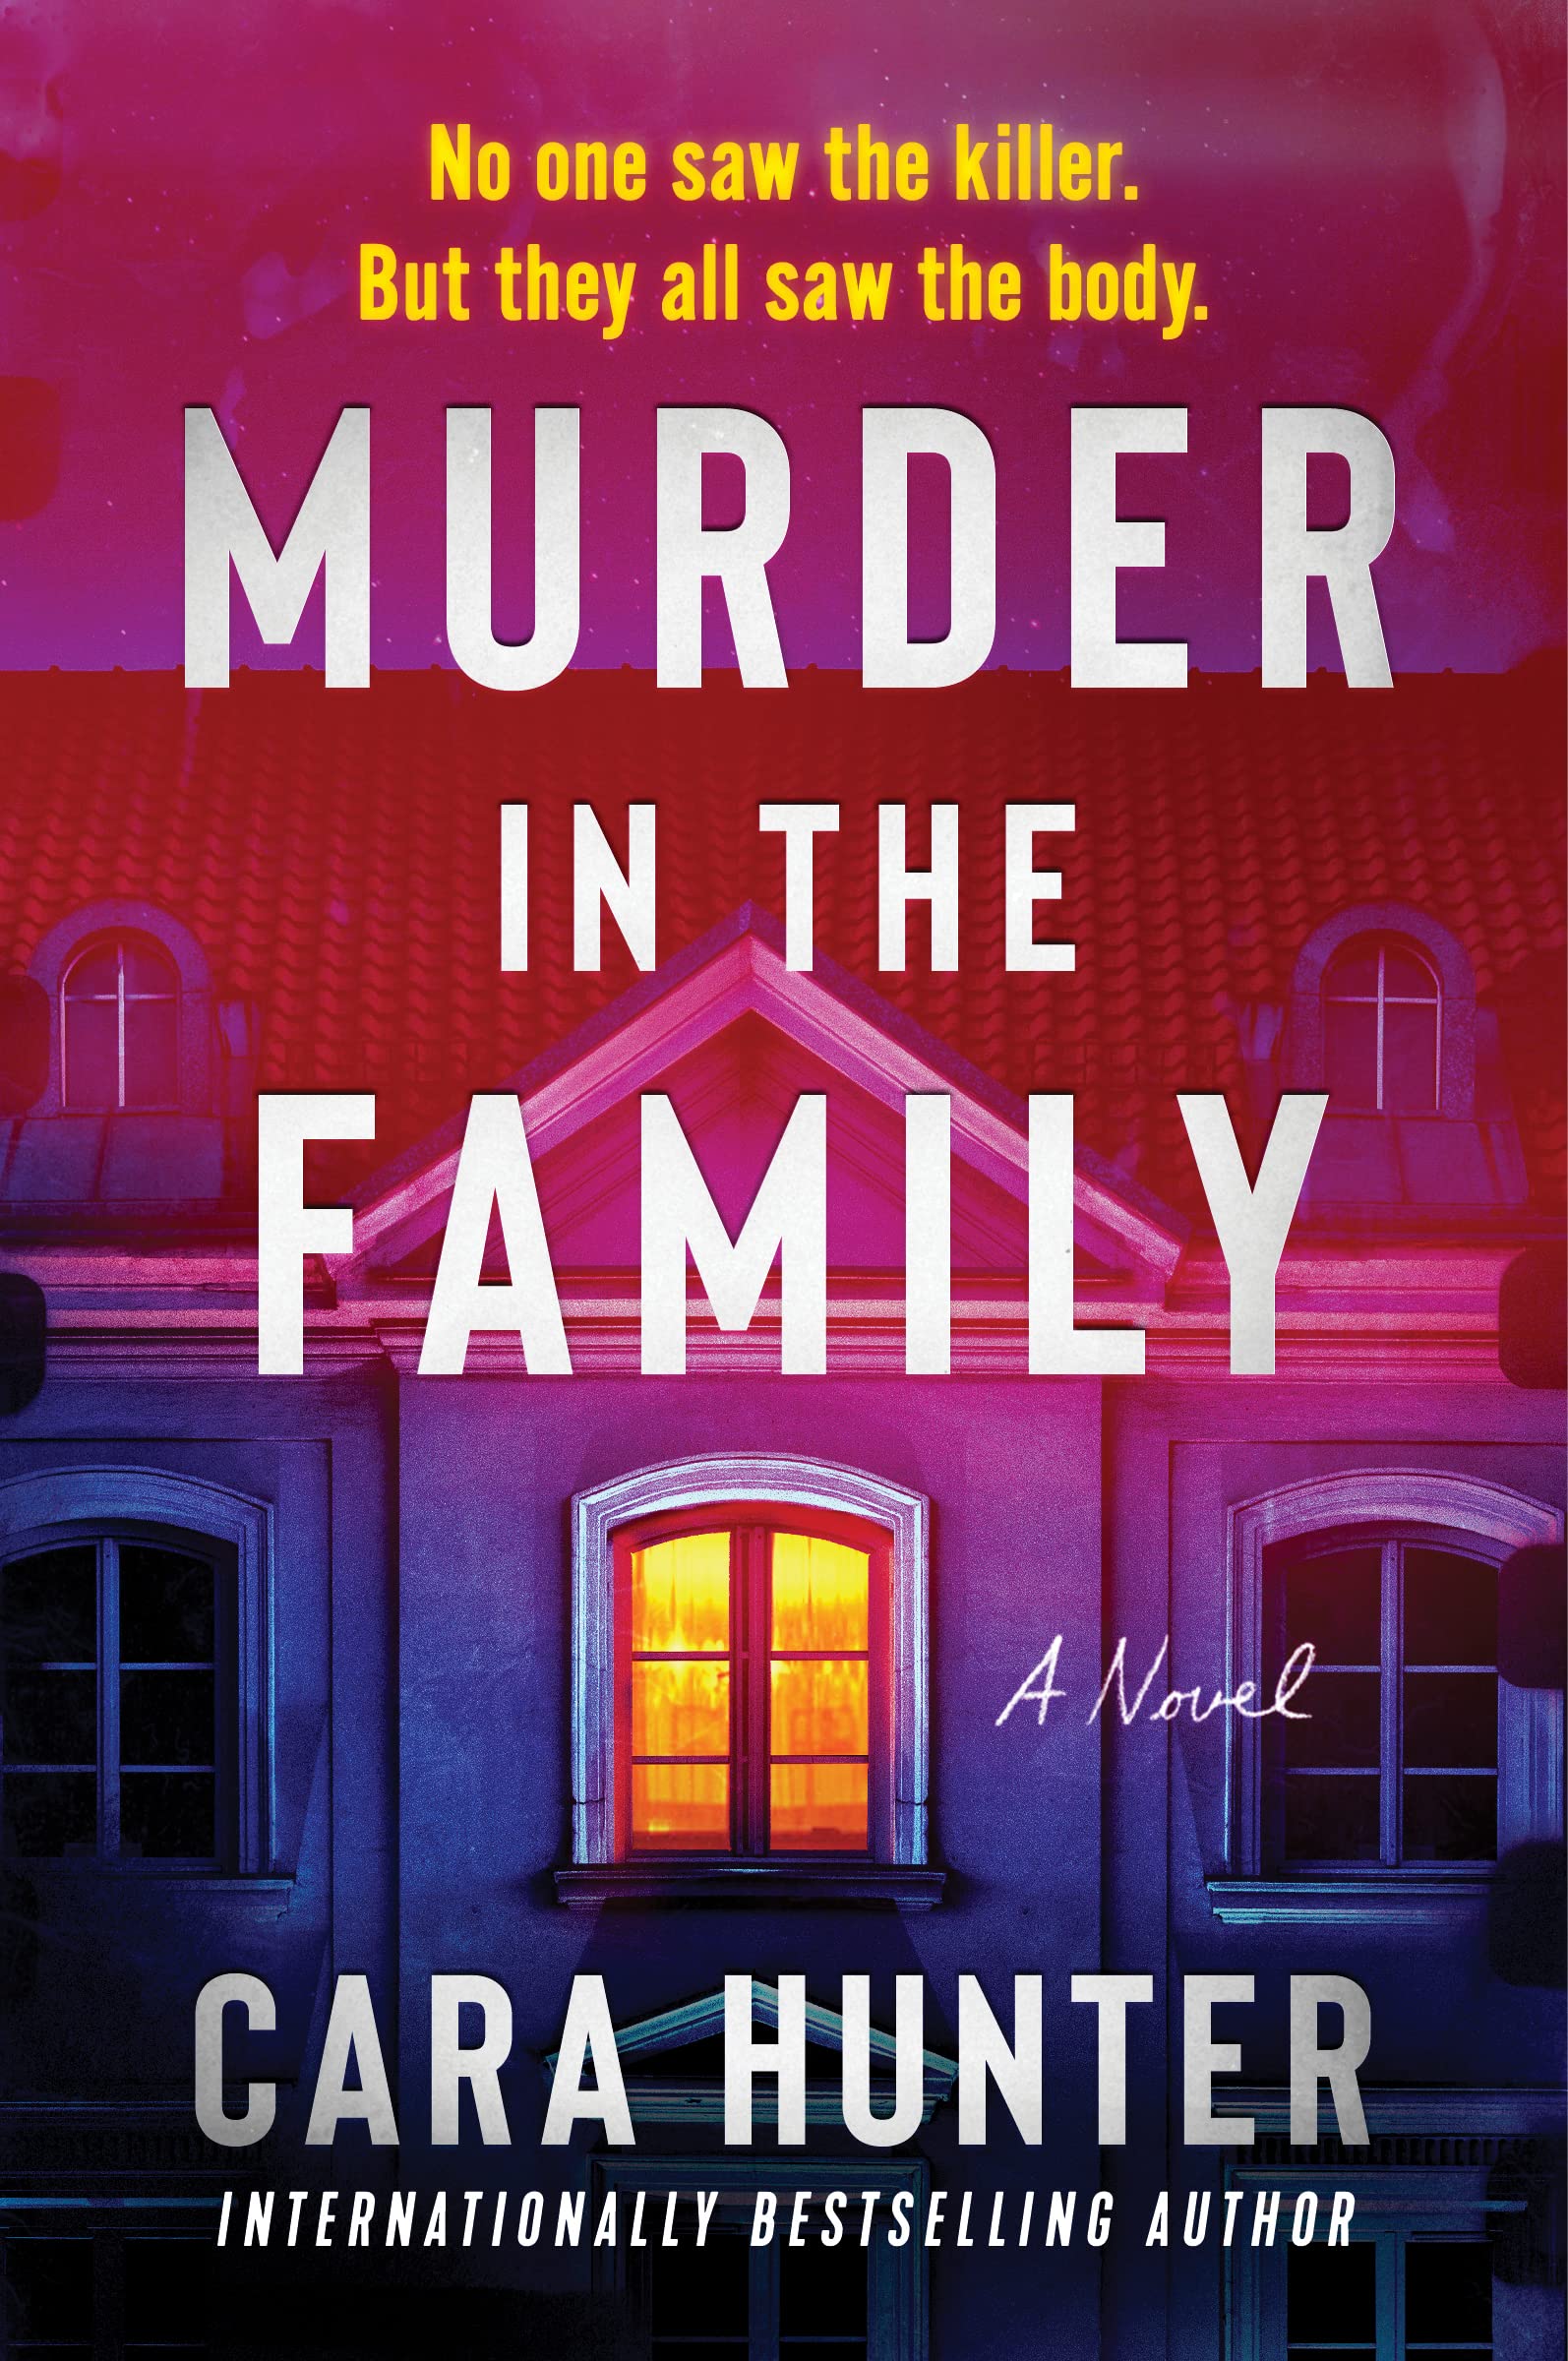 (PDF) Murder in the Family By _ (Cara Hunter).pdf